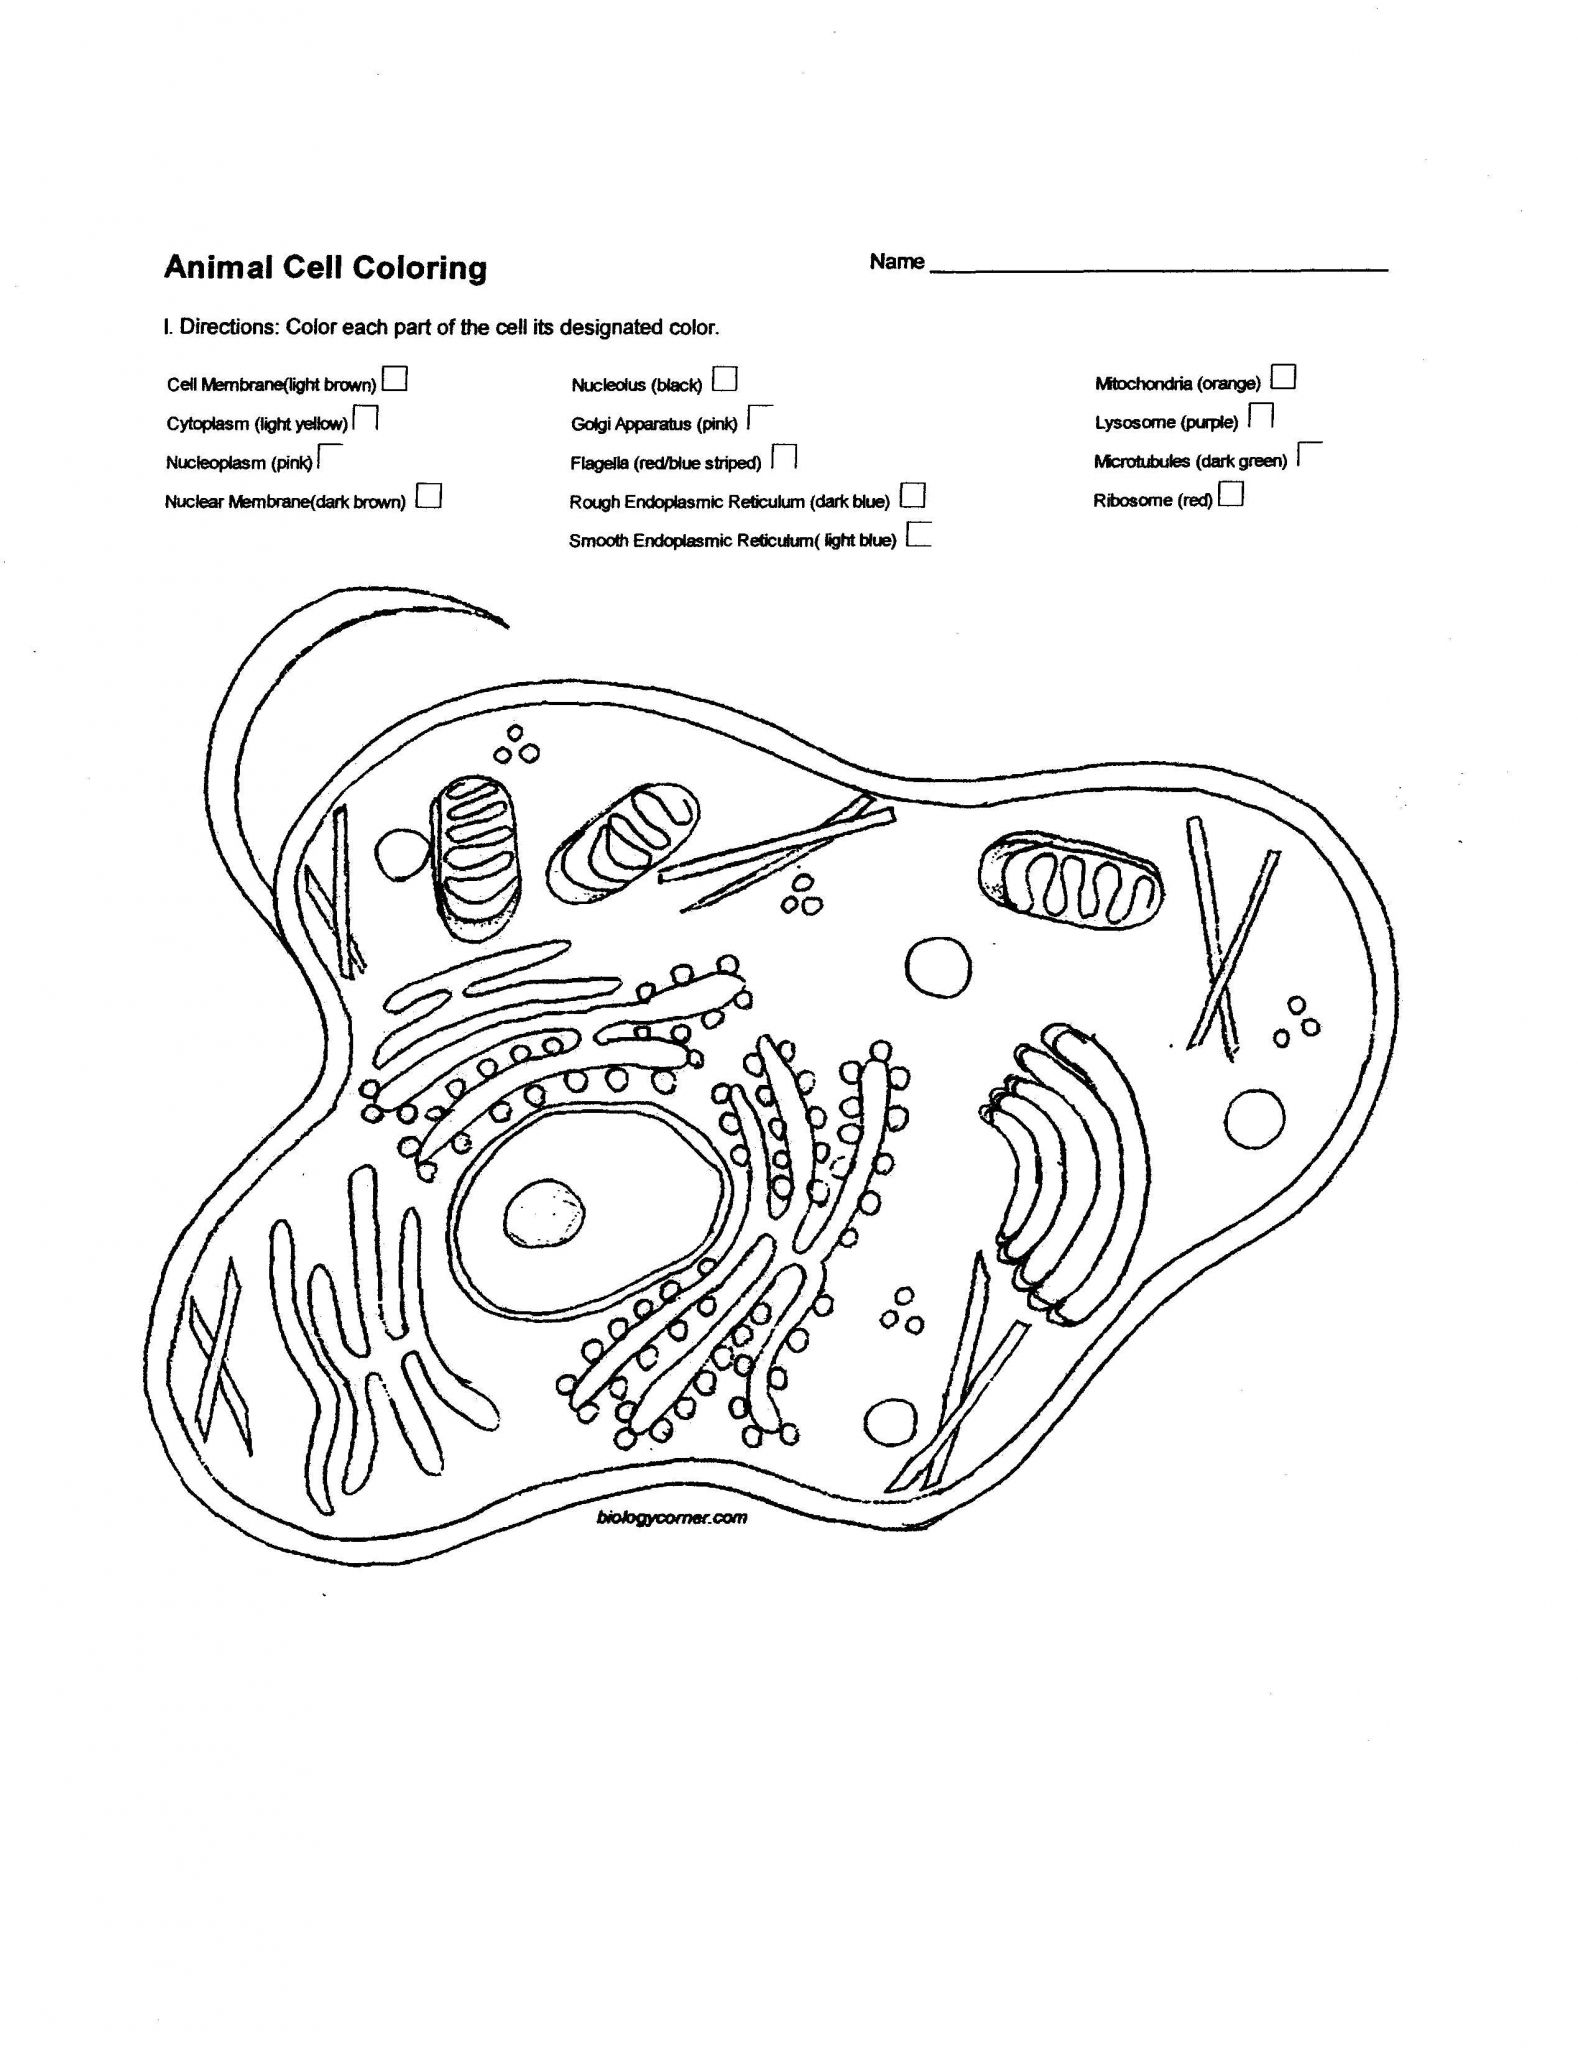 Cellular Structure and Function Worksheet and Plant Cell Drawing at Getdrawings